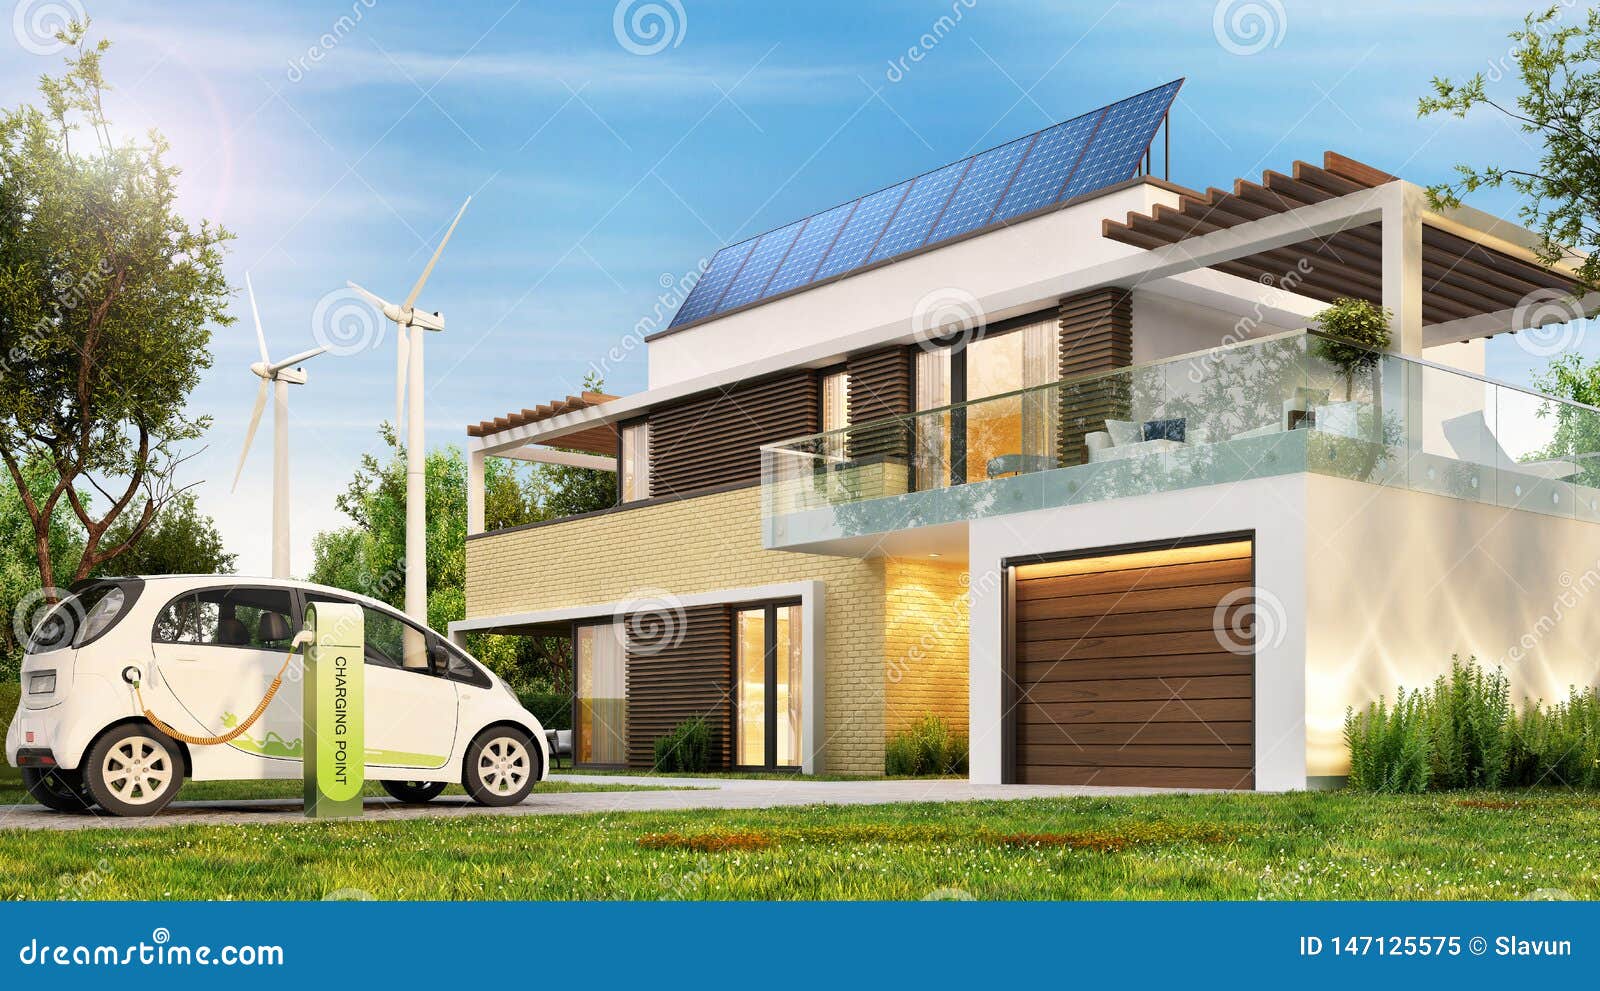 modern eco house with solar panels and wind turbines and an electric car.